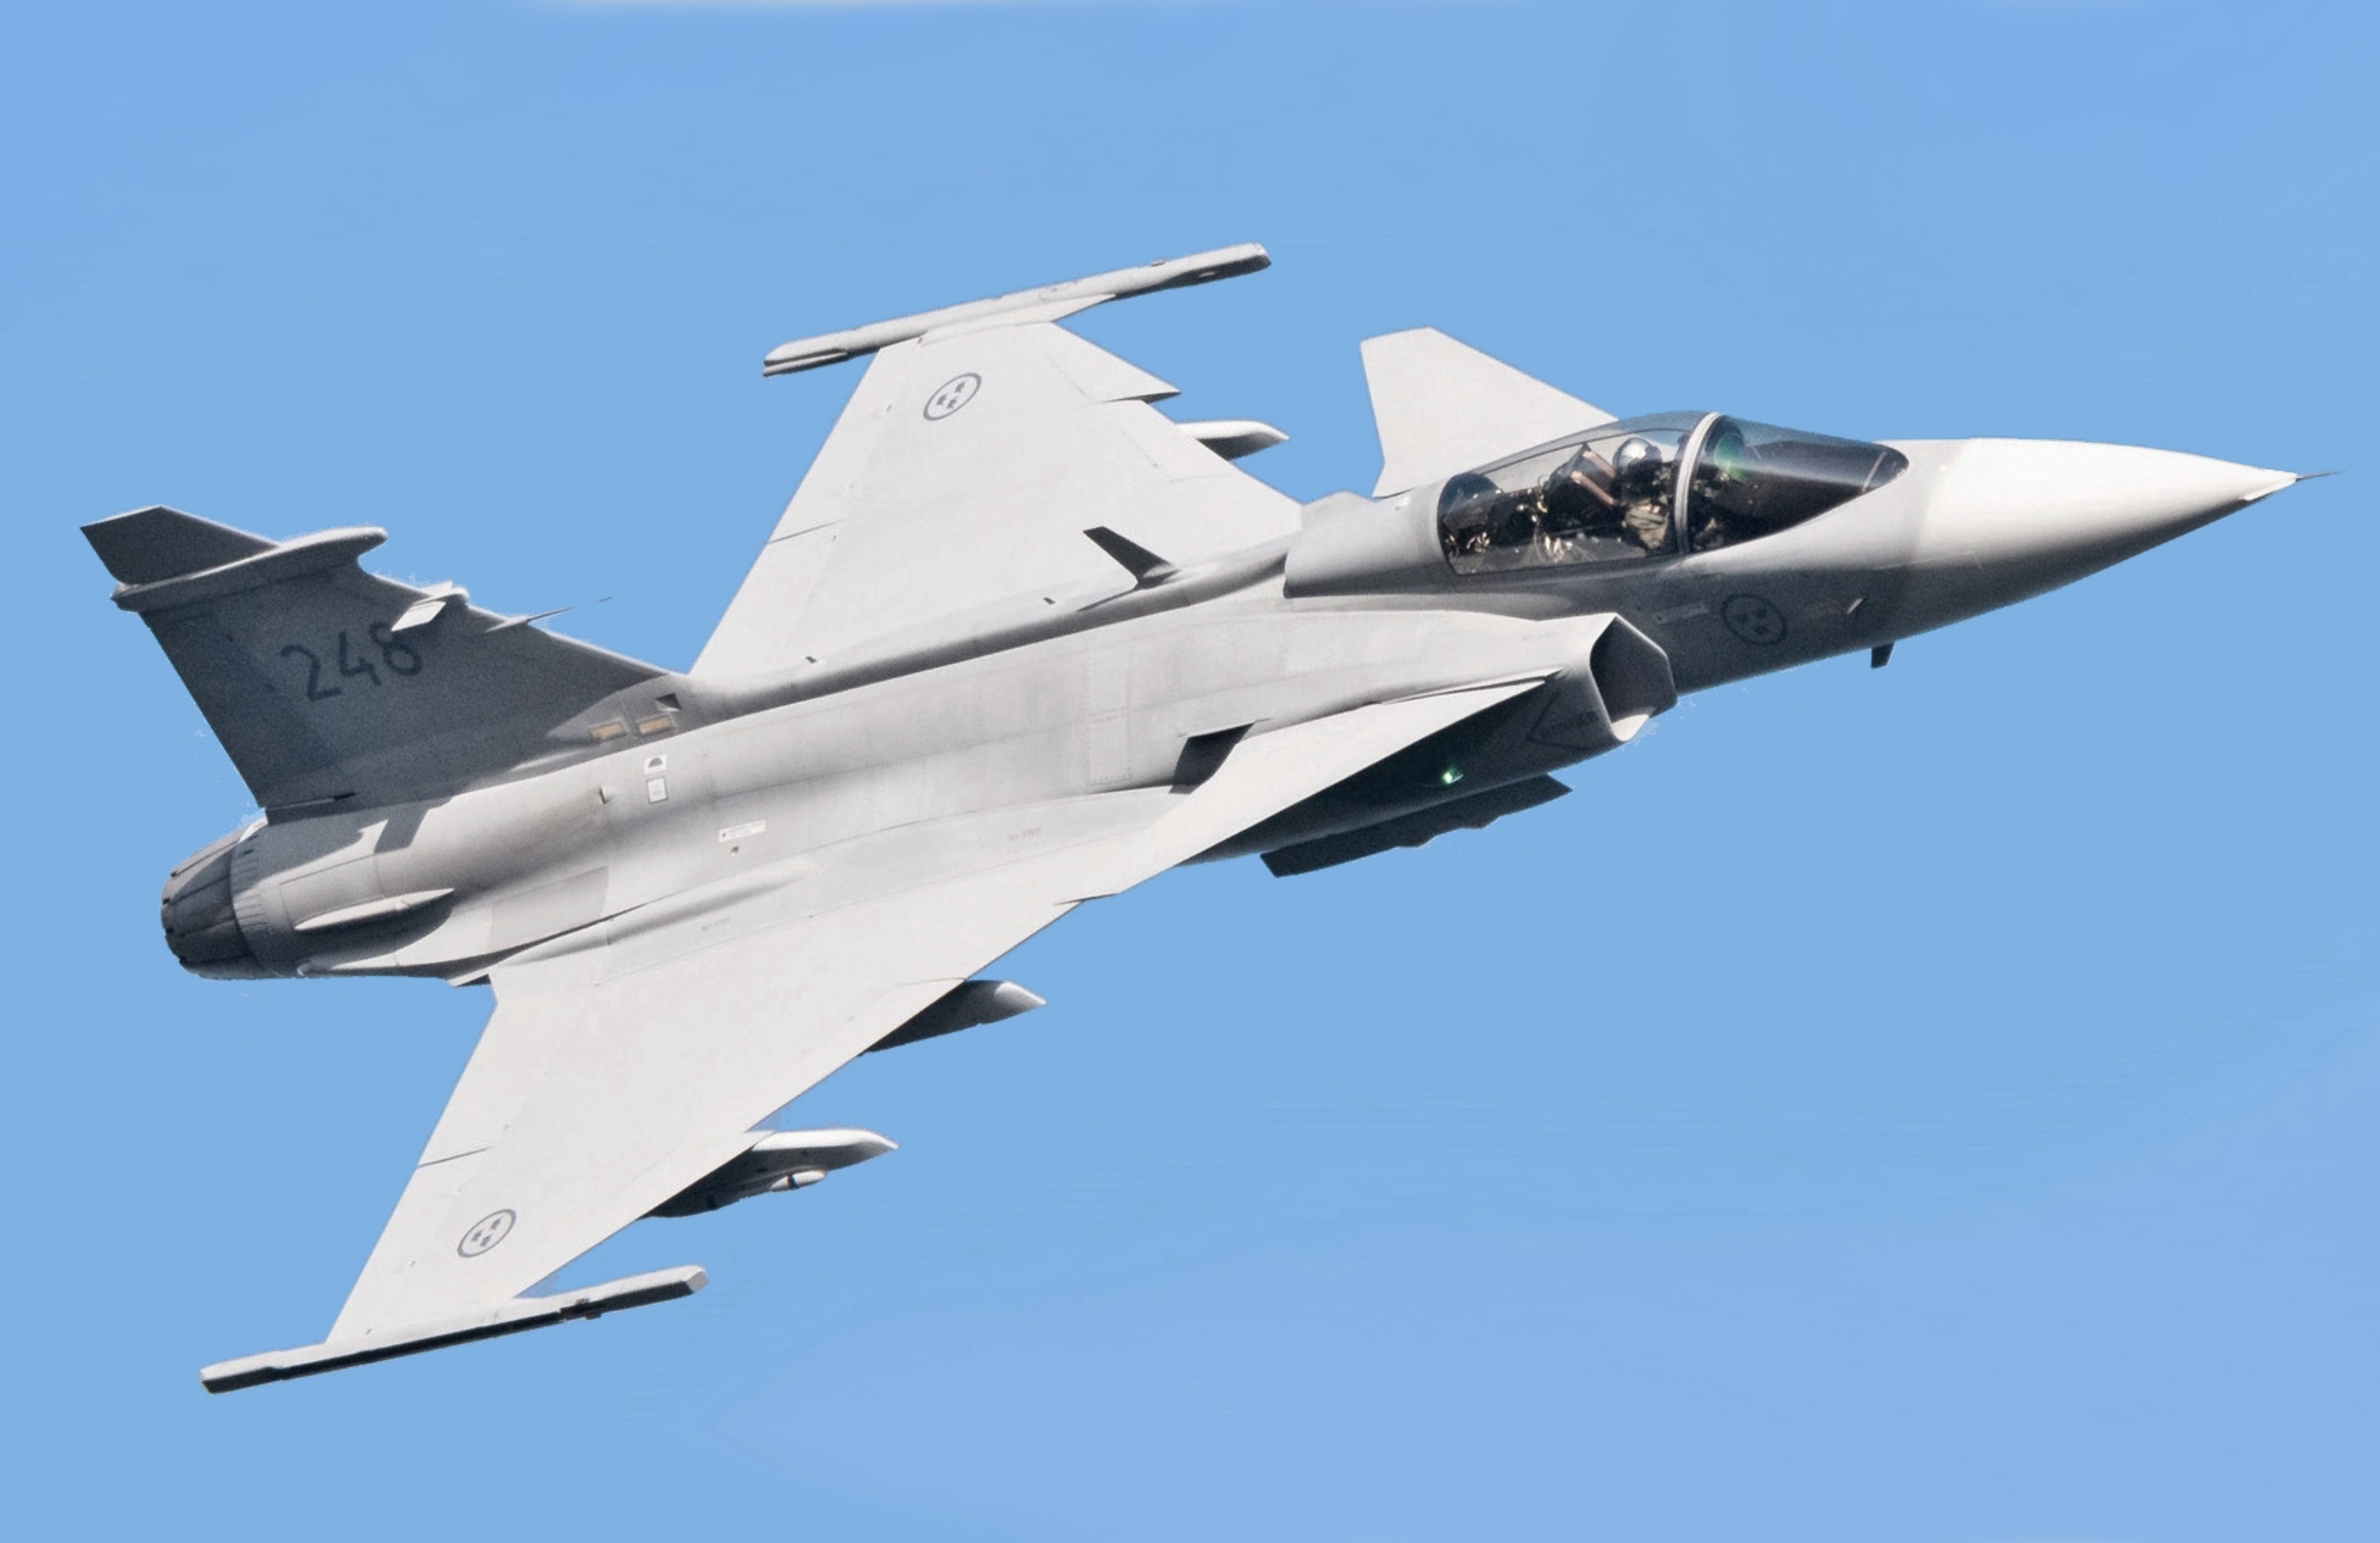 Not only F-16 Fighting Falcon: Ukraine wants Saab JAS 39 Gripen fighters, Ukrainian pilots are already testing the aircraft in Sweden